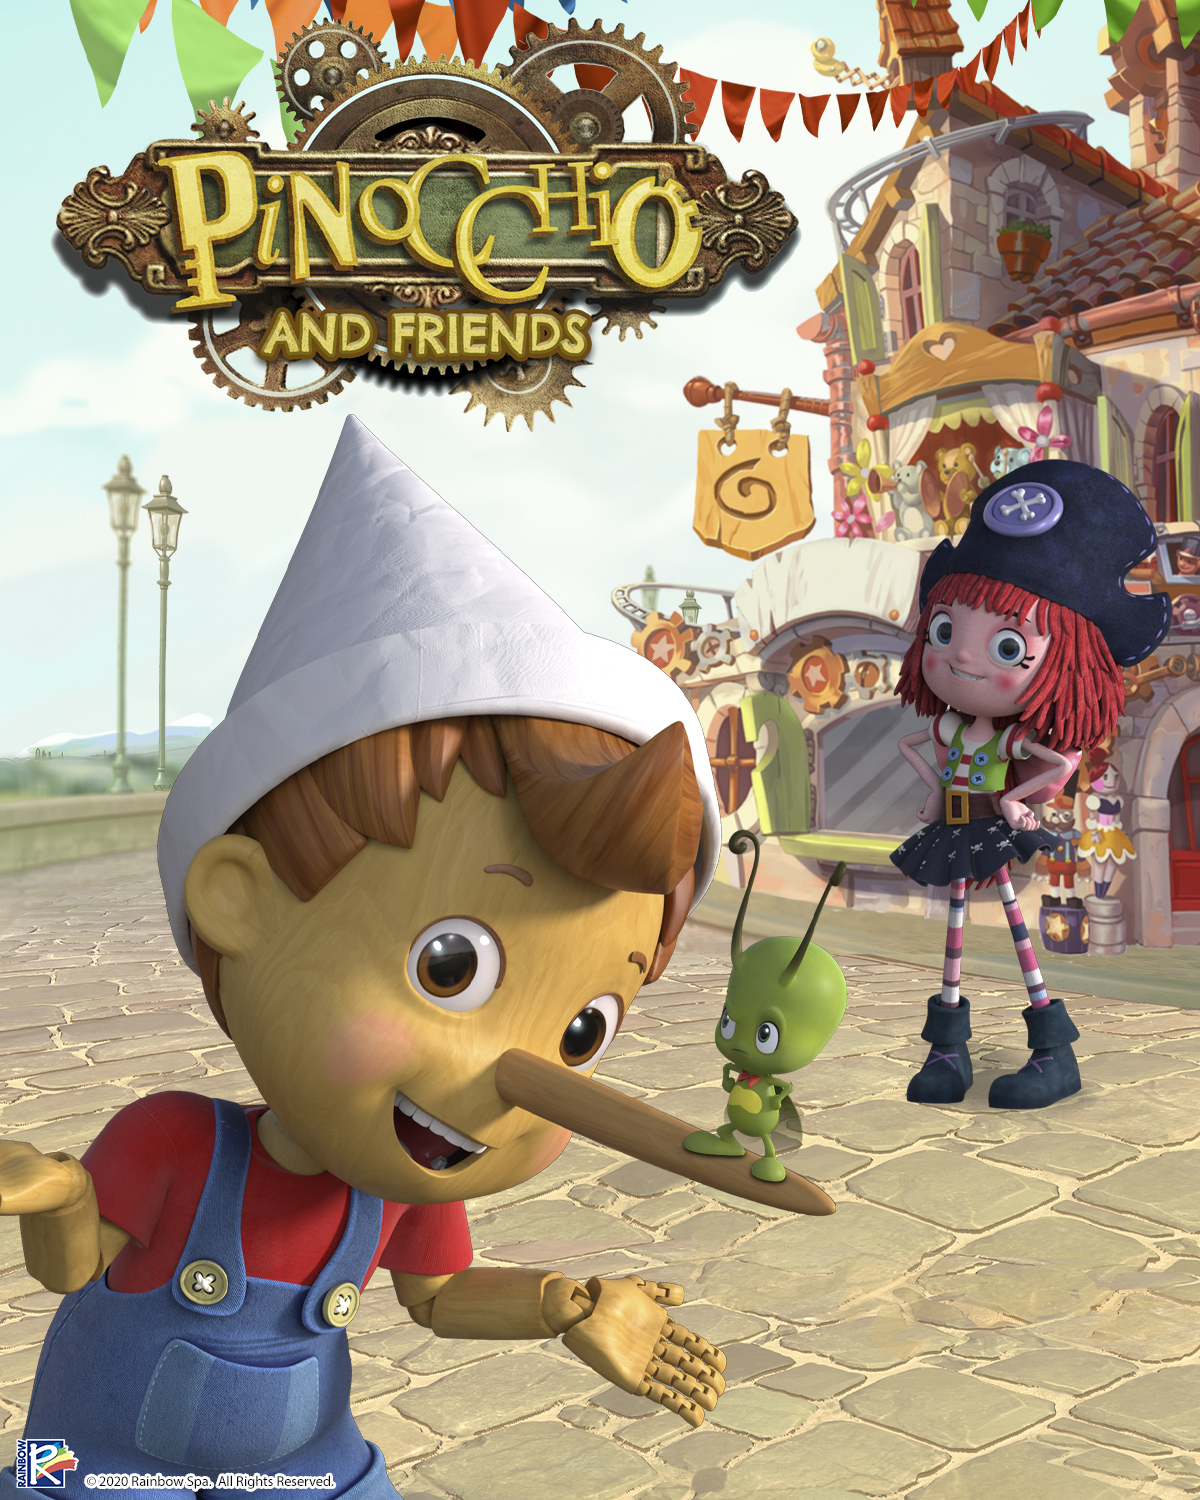 Pinocchio_and_Friends